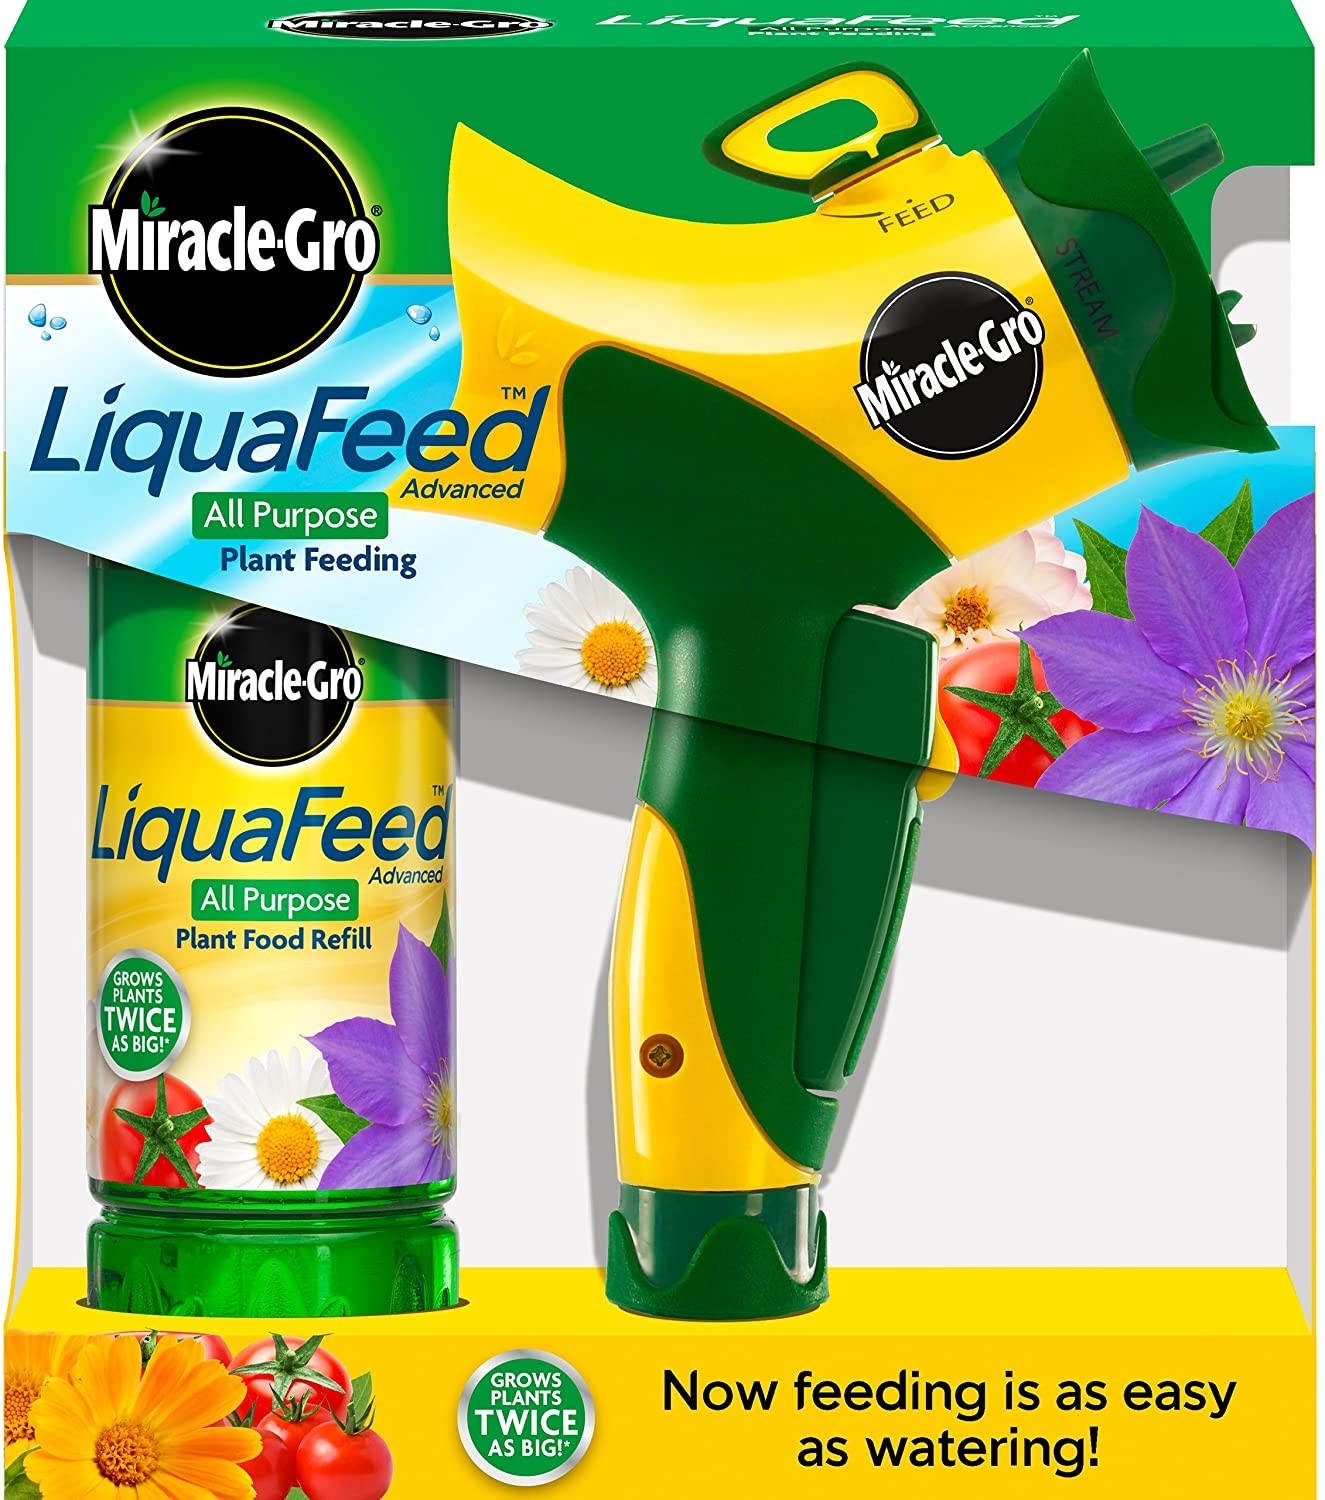 Miracle-Gro Liquafeed Starter Kit - NWT FM SOLUTIONS - YOUR CATERING WHOLESALER